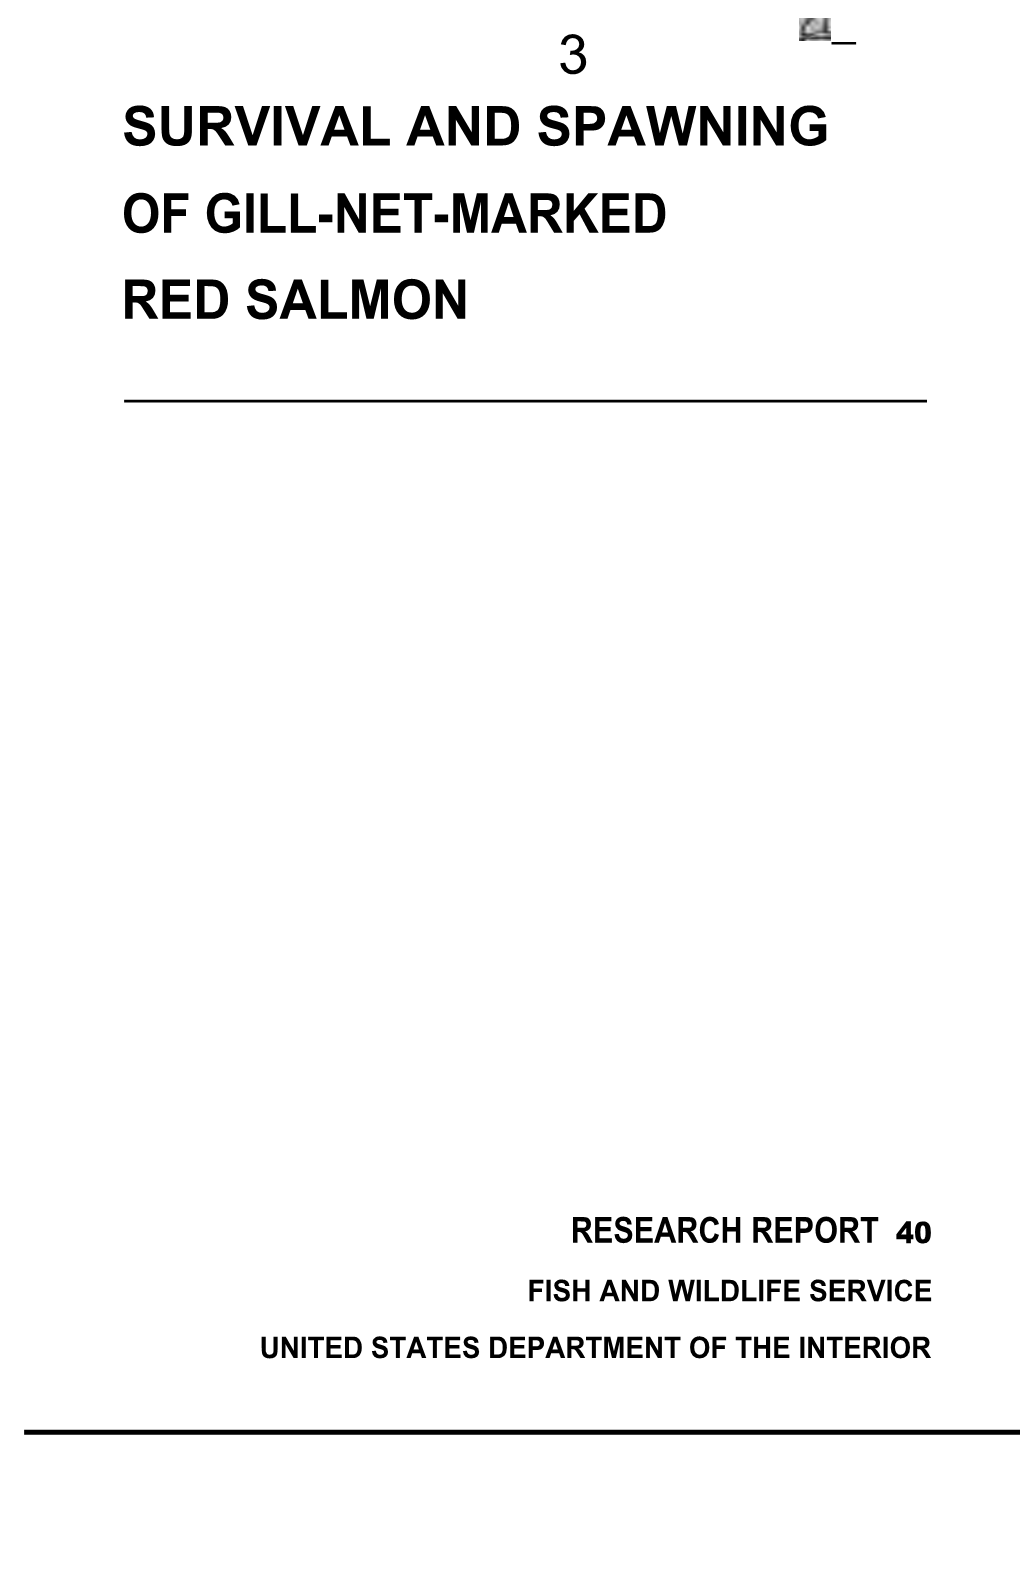 3 Survival and Spawning of Gill-Net-Marked Red Salmon